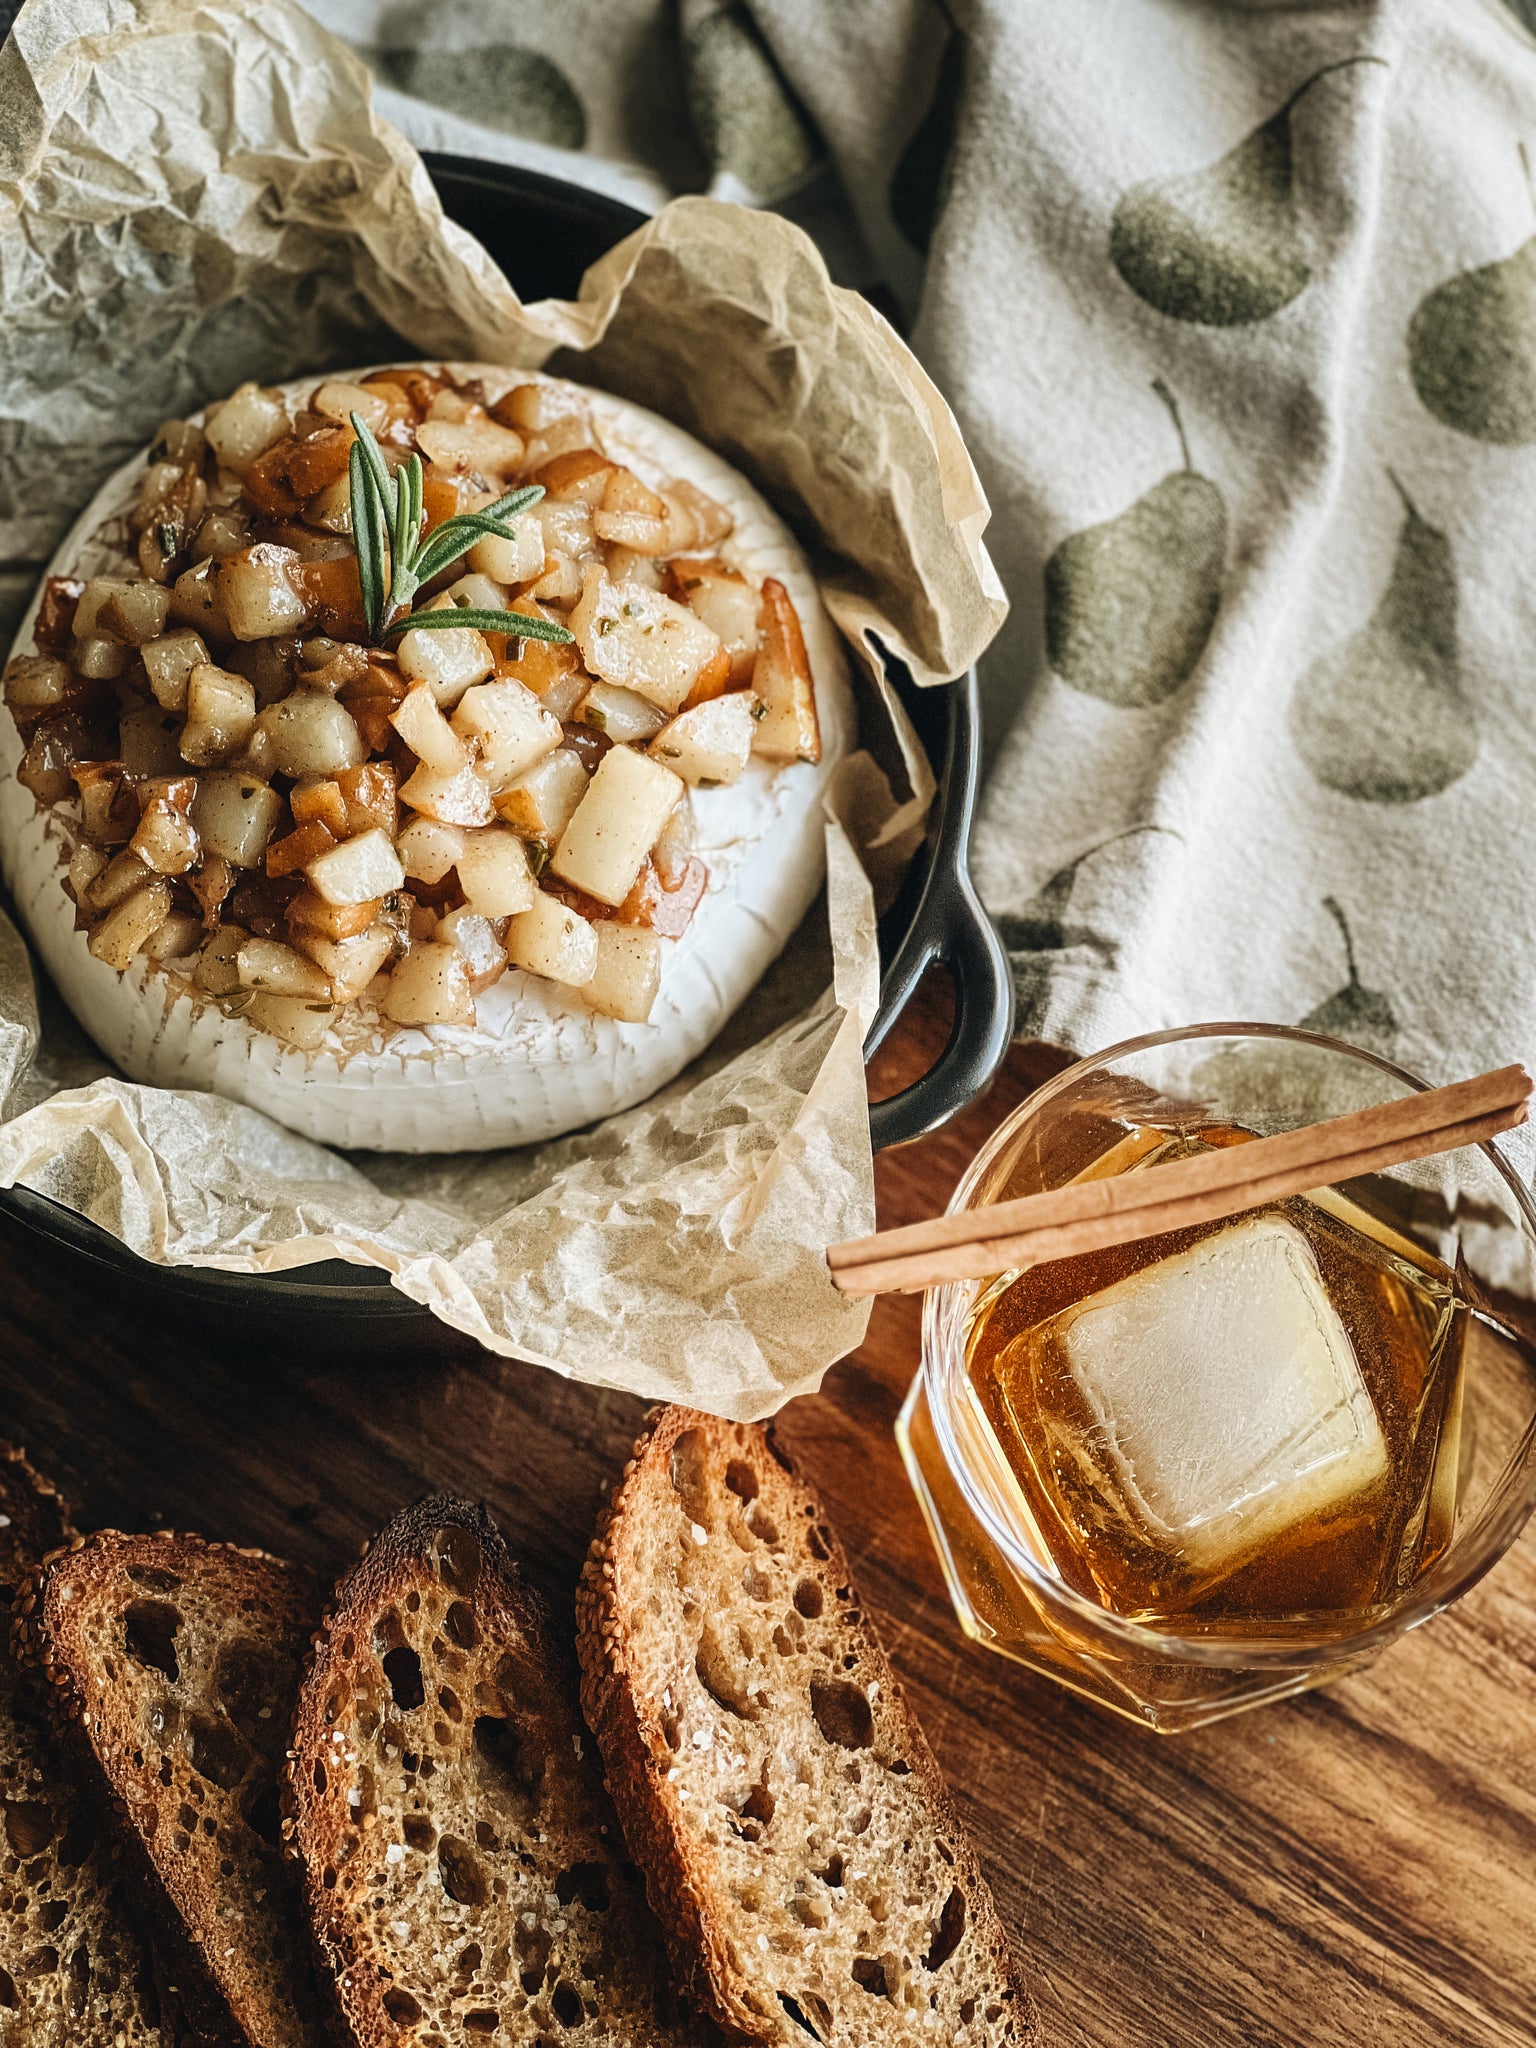 Baked Camembert with Spiced Pear Compote